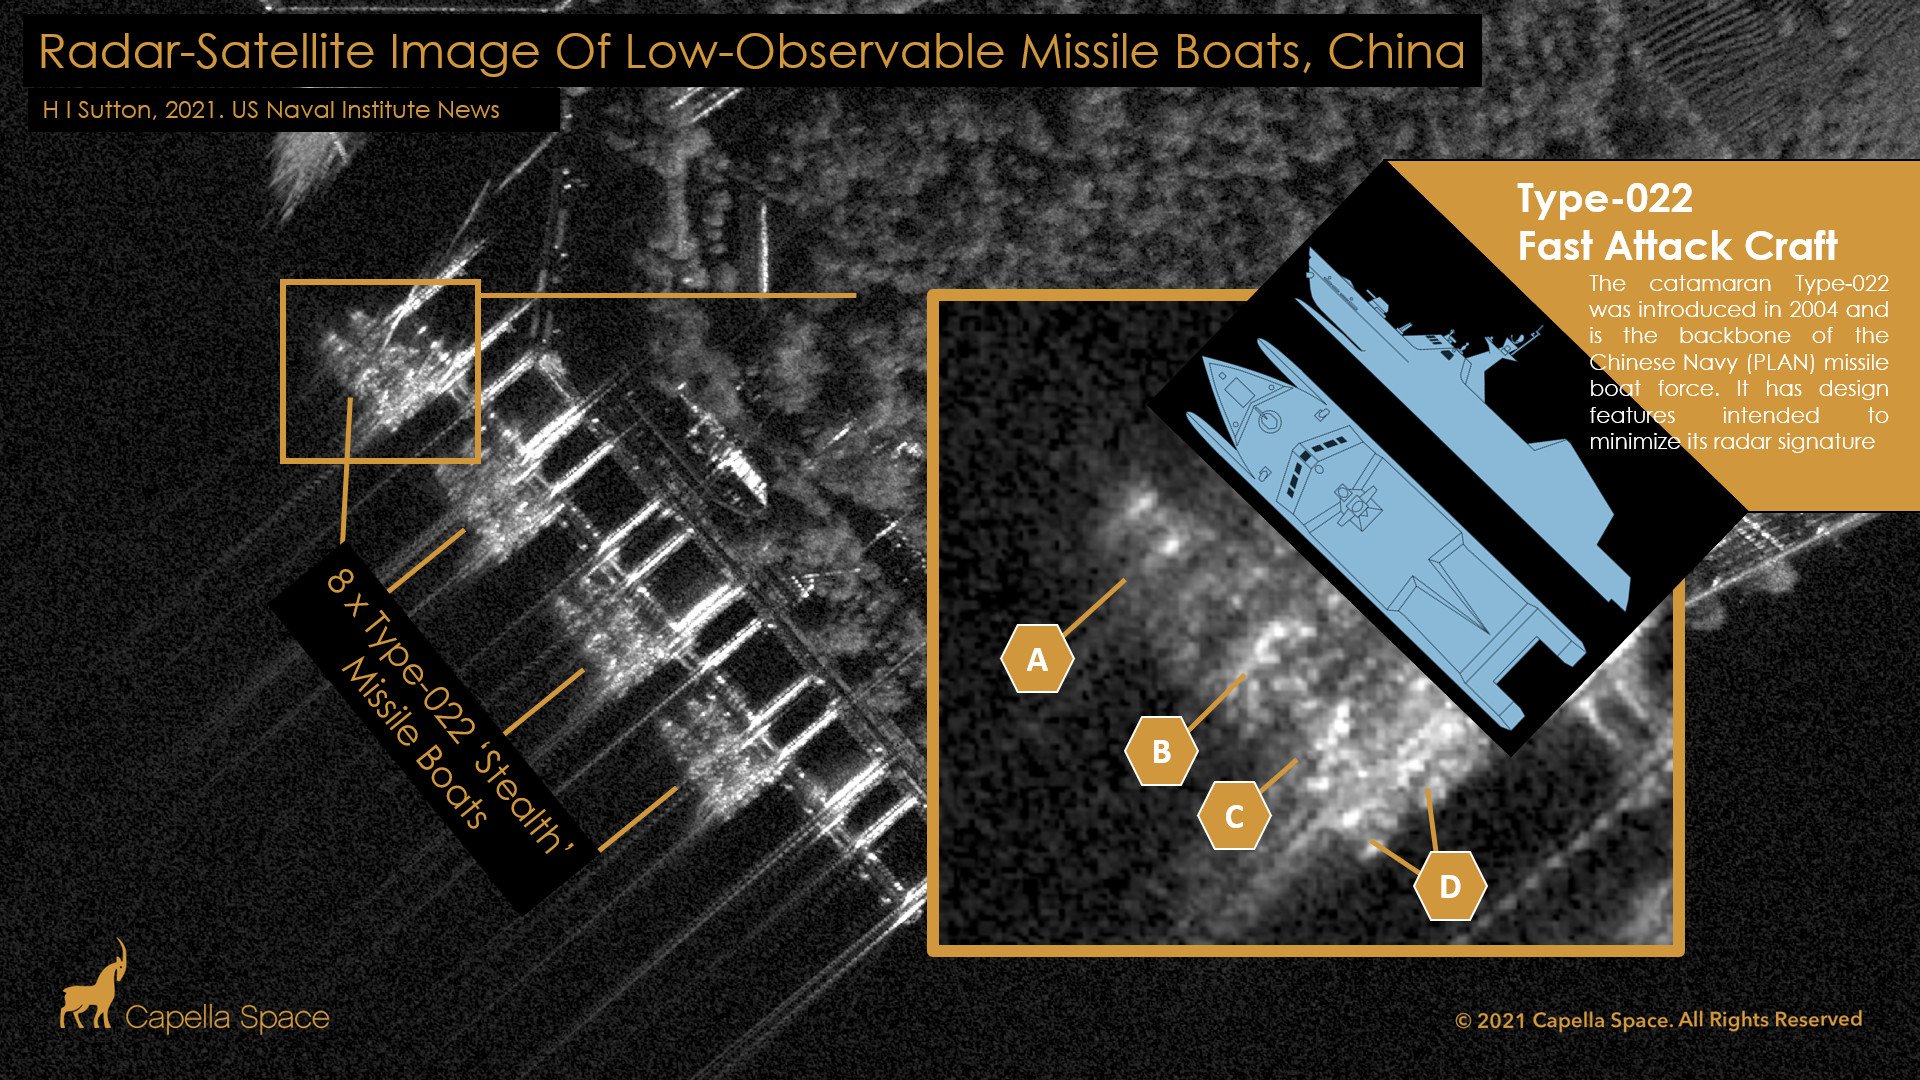 https://news.usni.org/2021/09/27/this-is-what-a-chinese-stealth-warship-looks-like-on-radar/stealth-boats-china-radar-sat